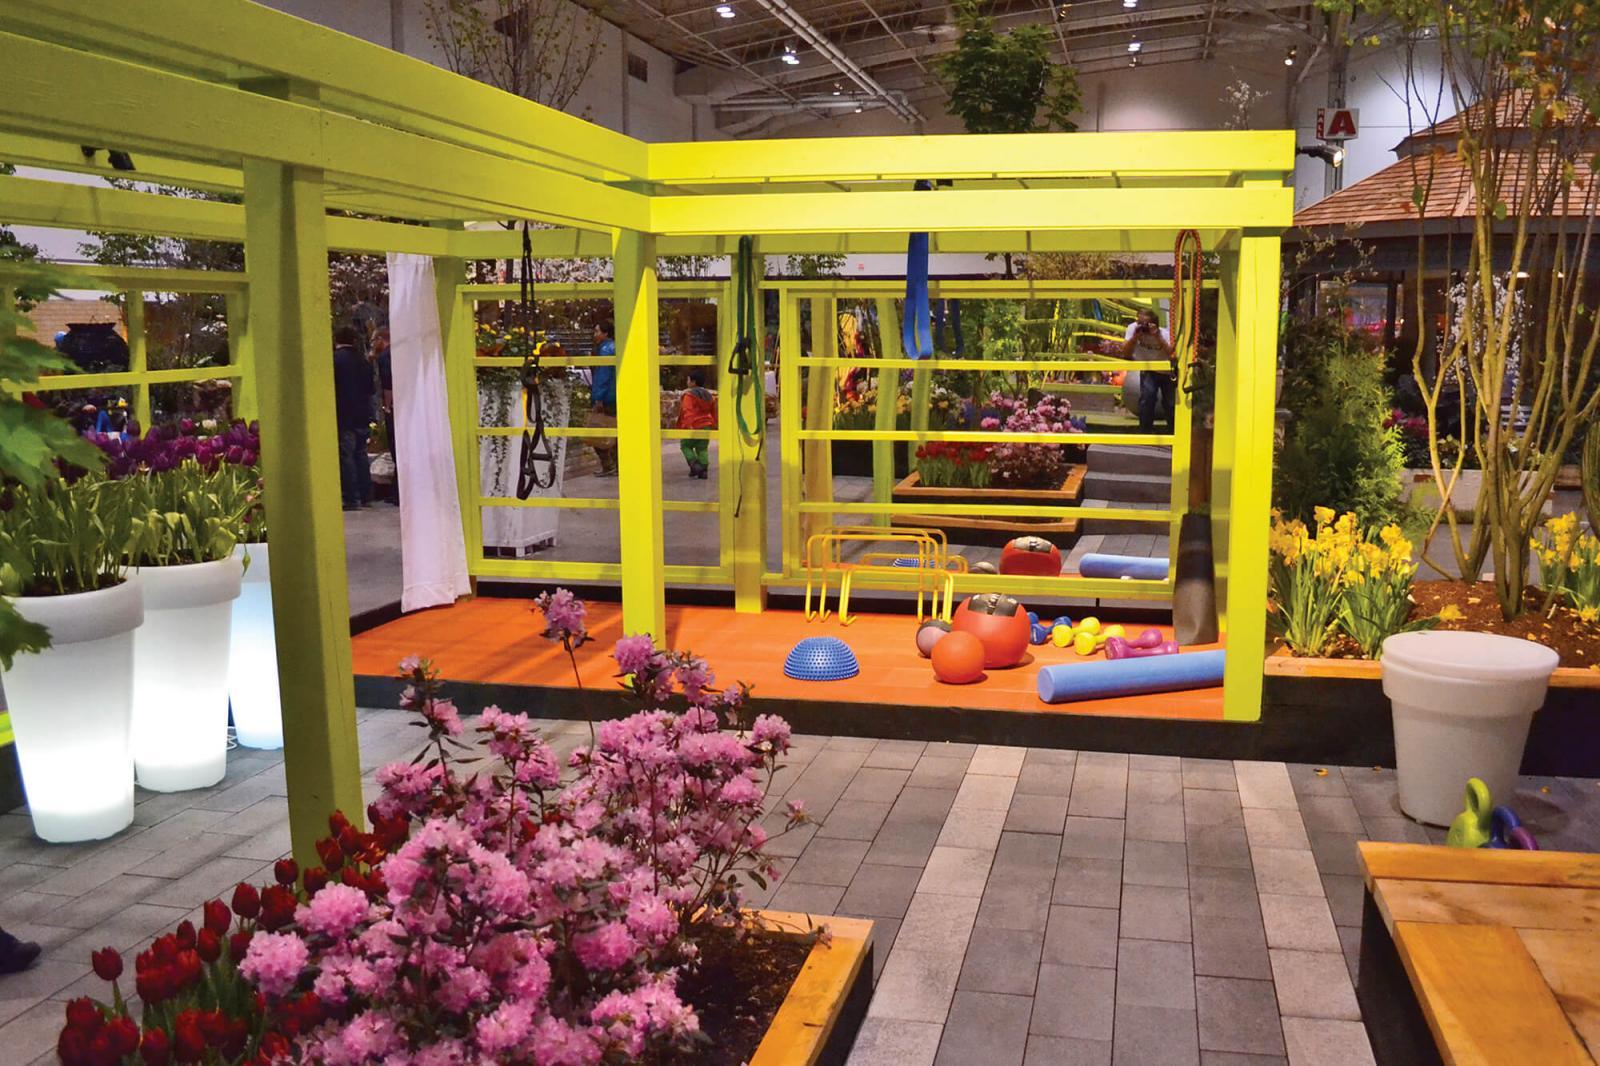 LO’s Canada Blooms garden will promote outdoor exercise